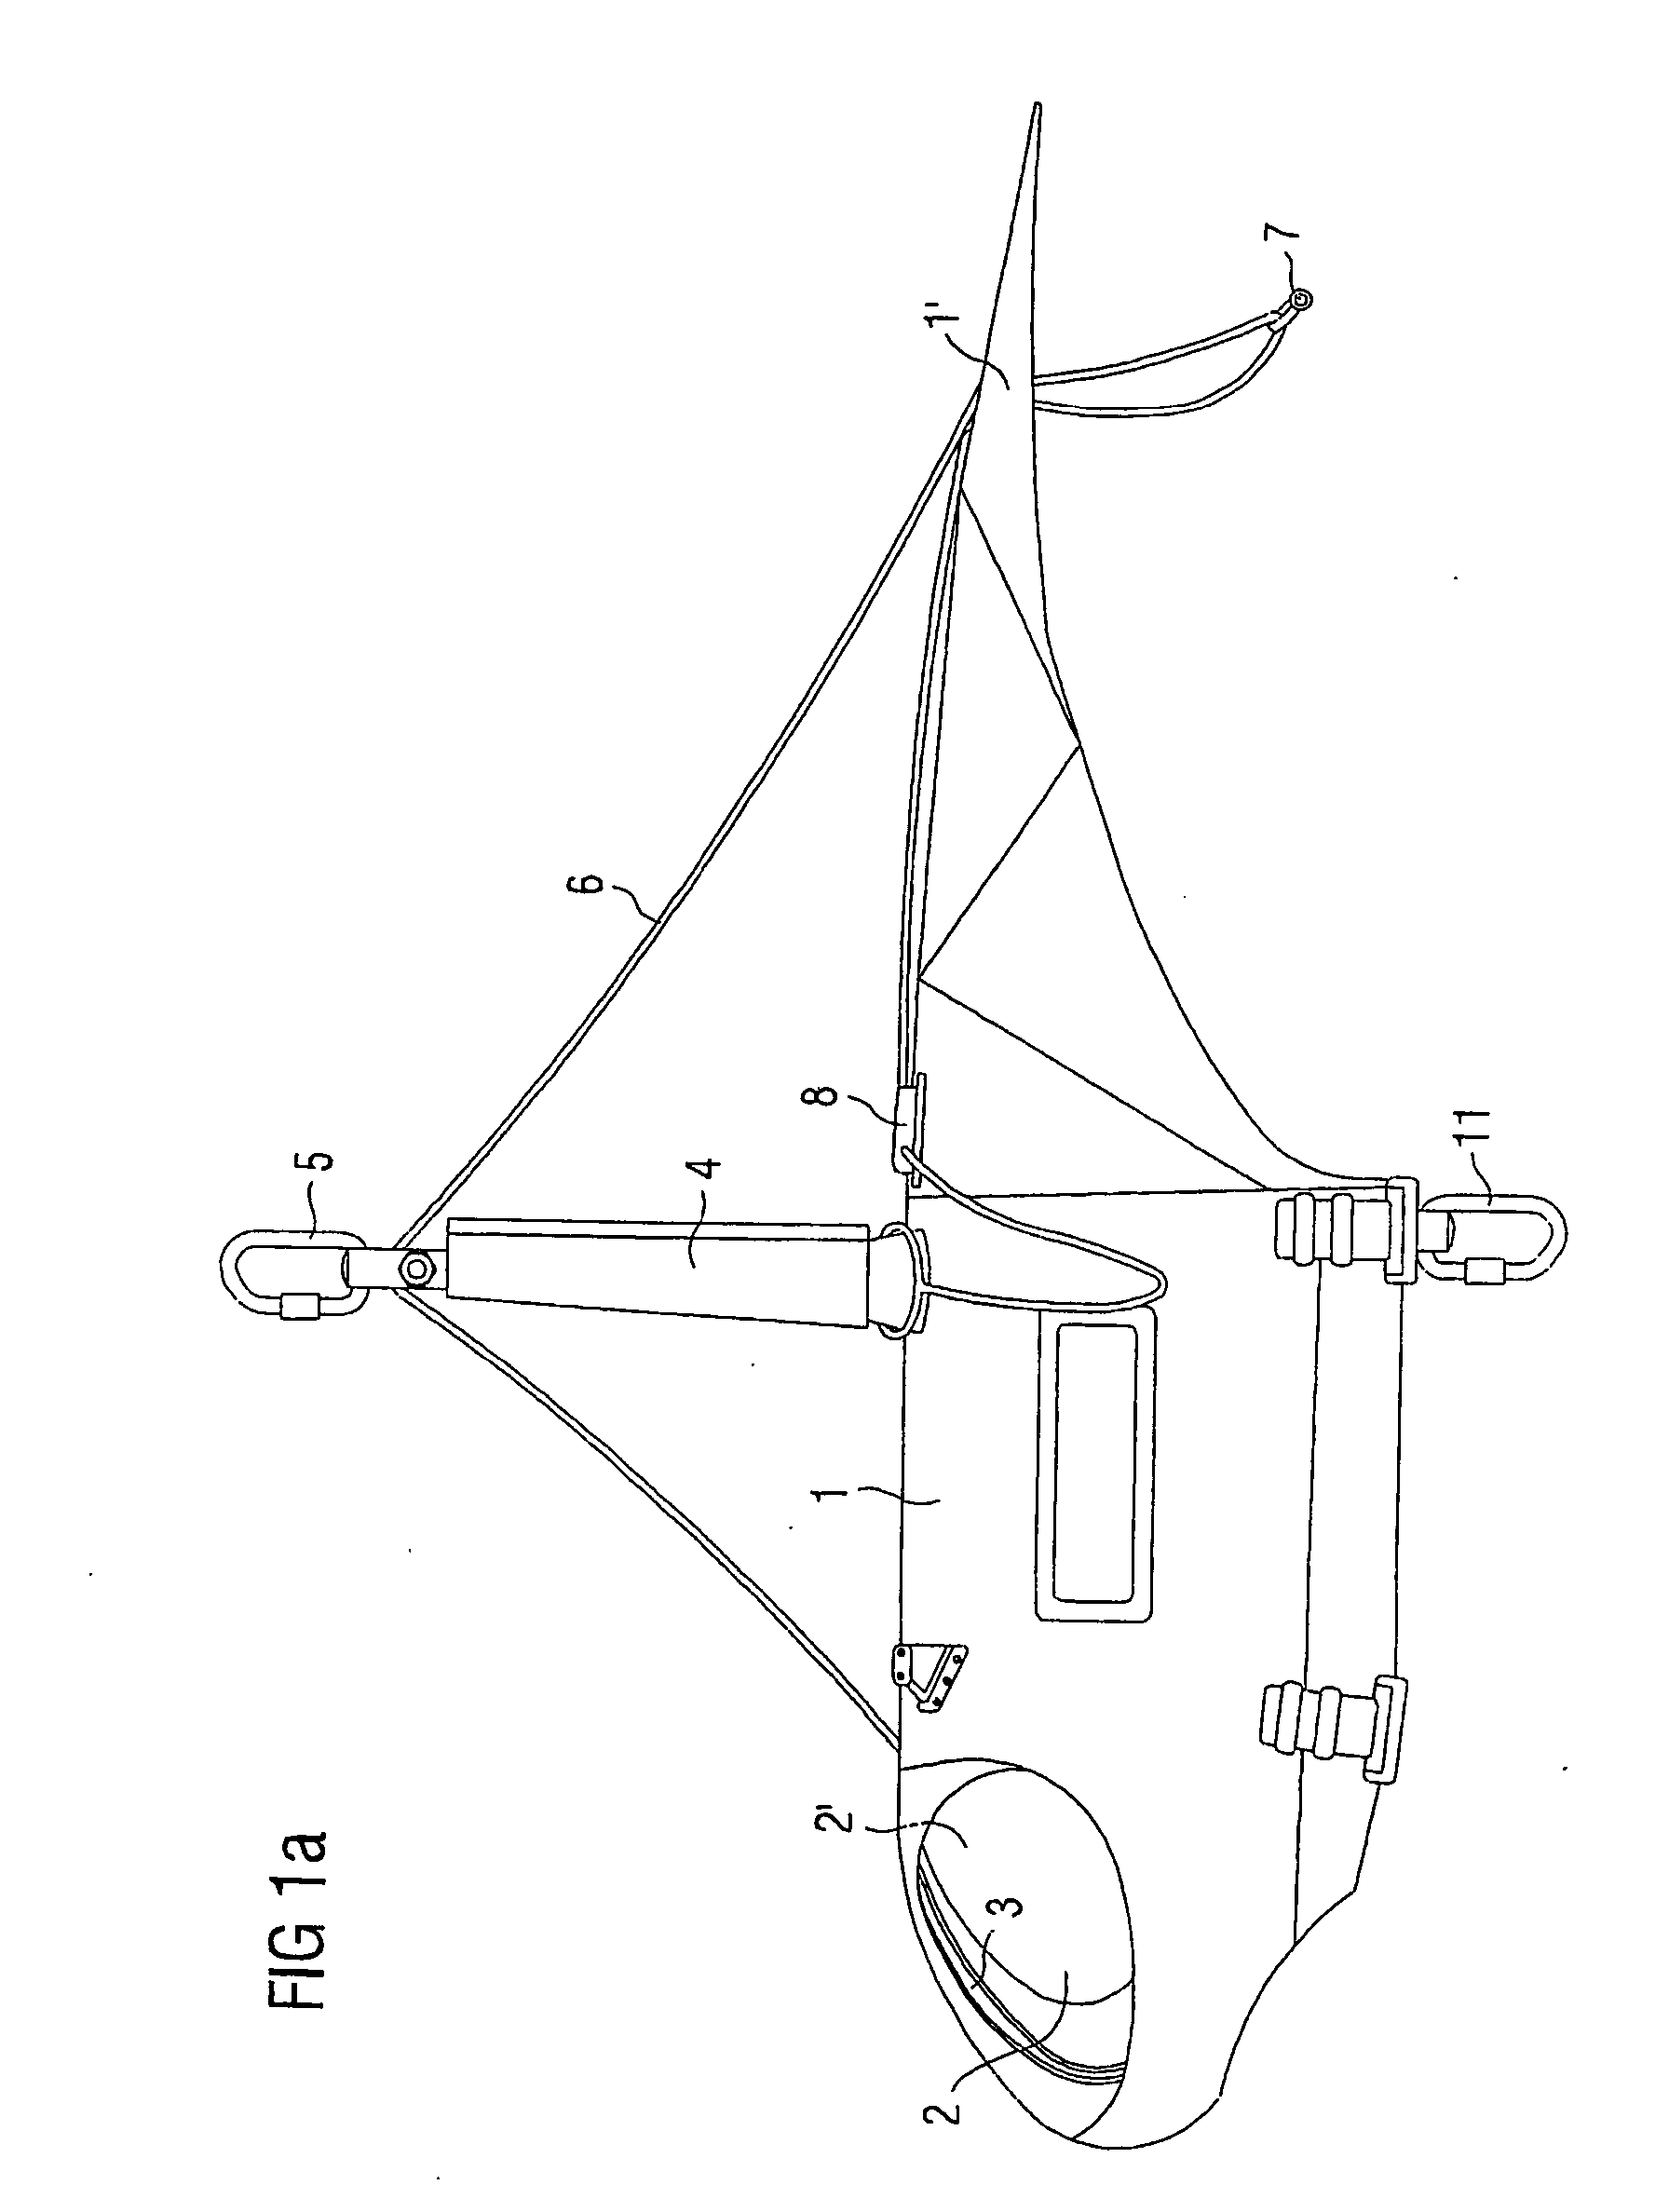 Demonstration device for flying sport devices